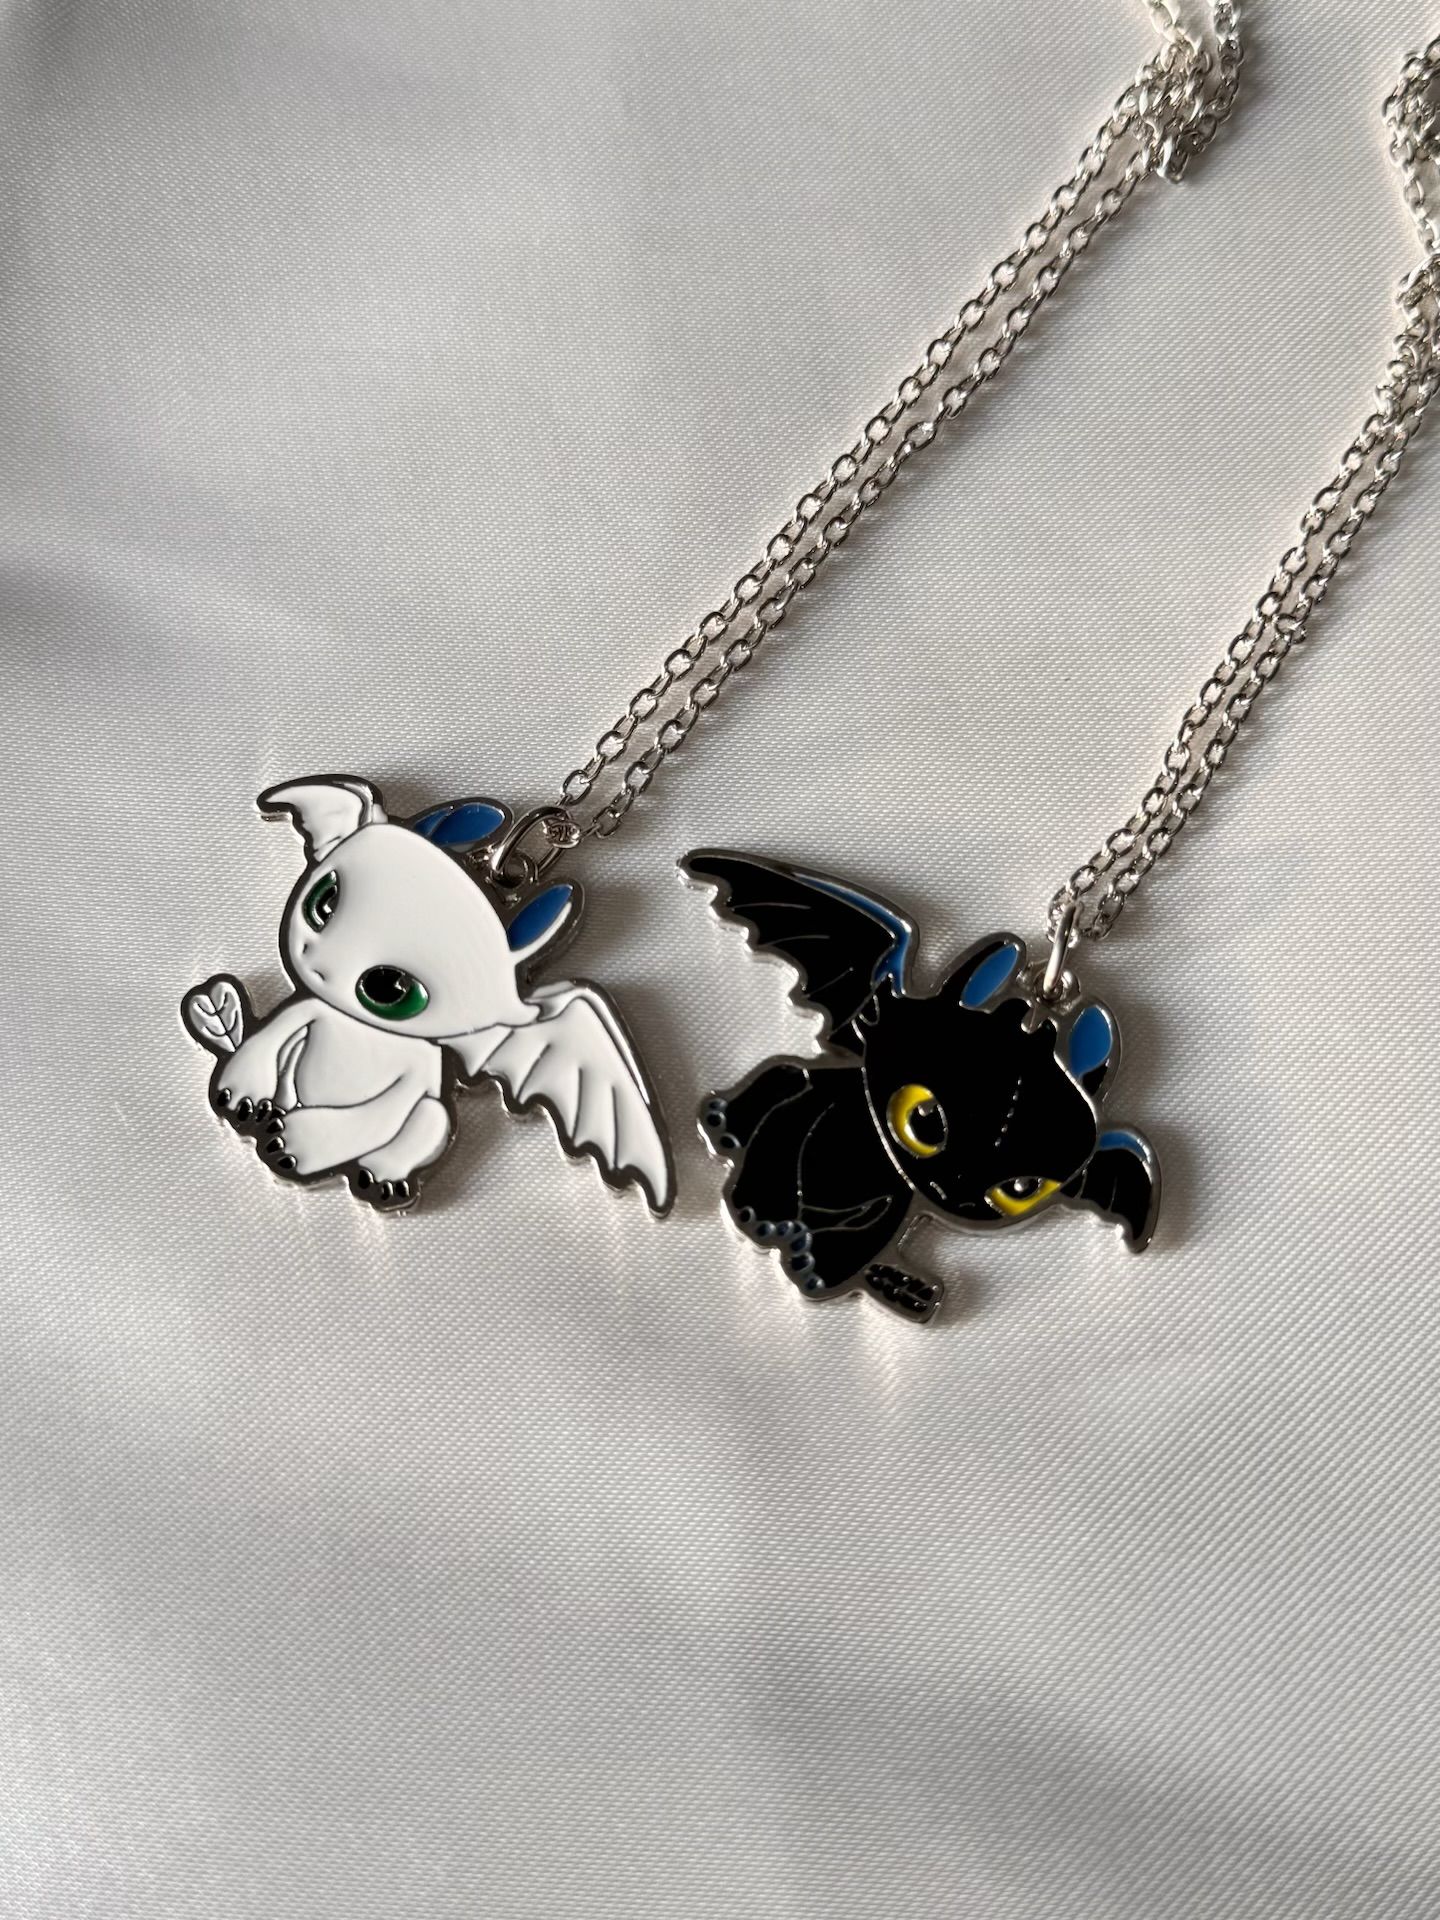 Large Size How to Train Your Dragon Necklace Set